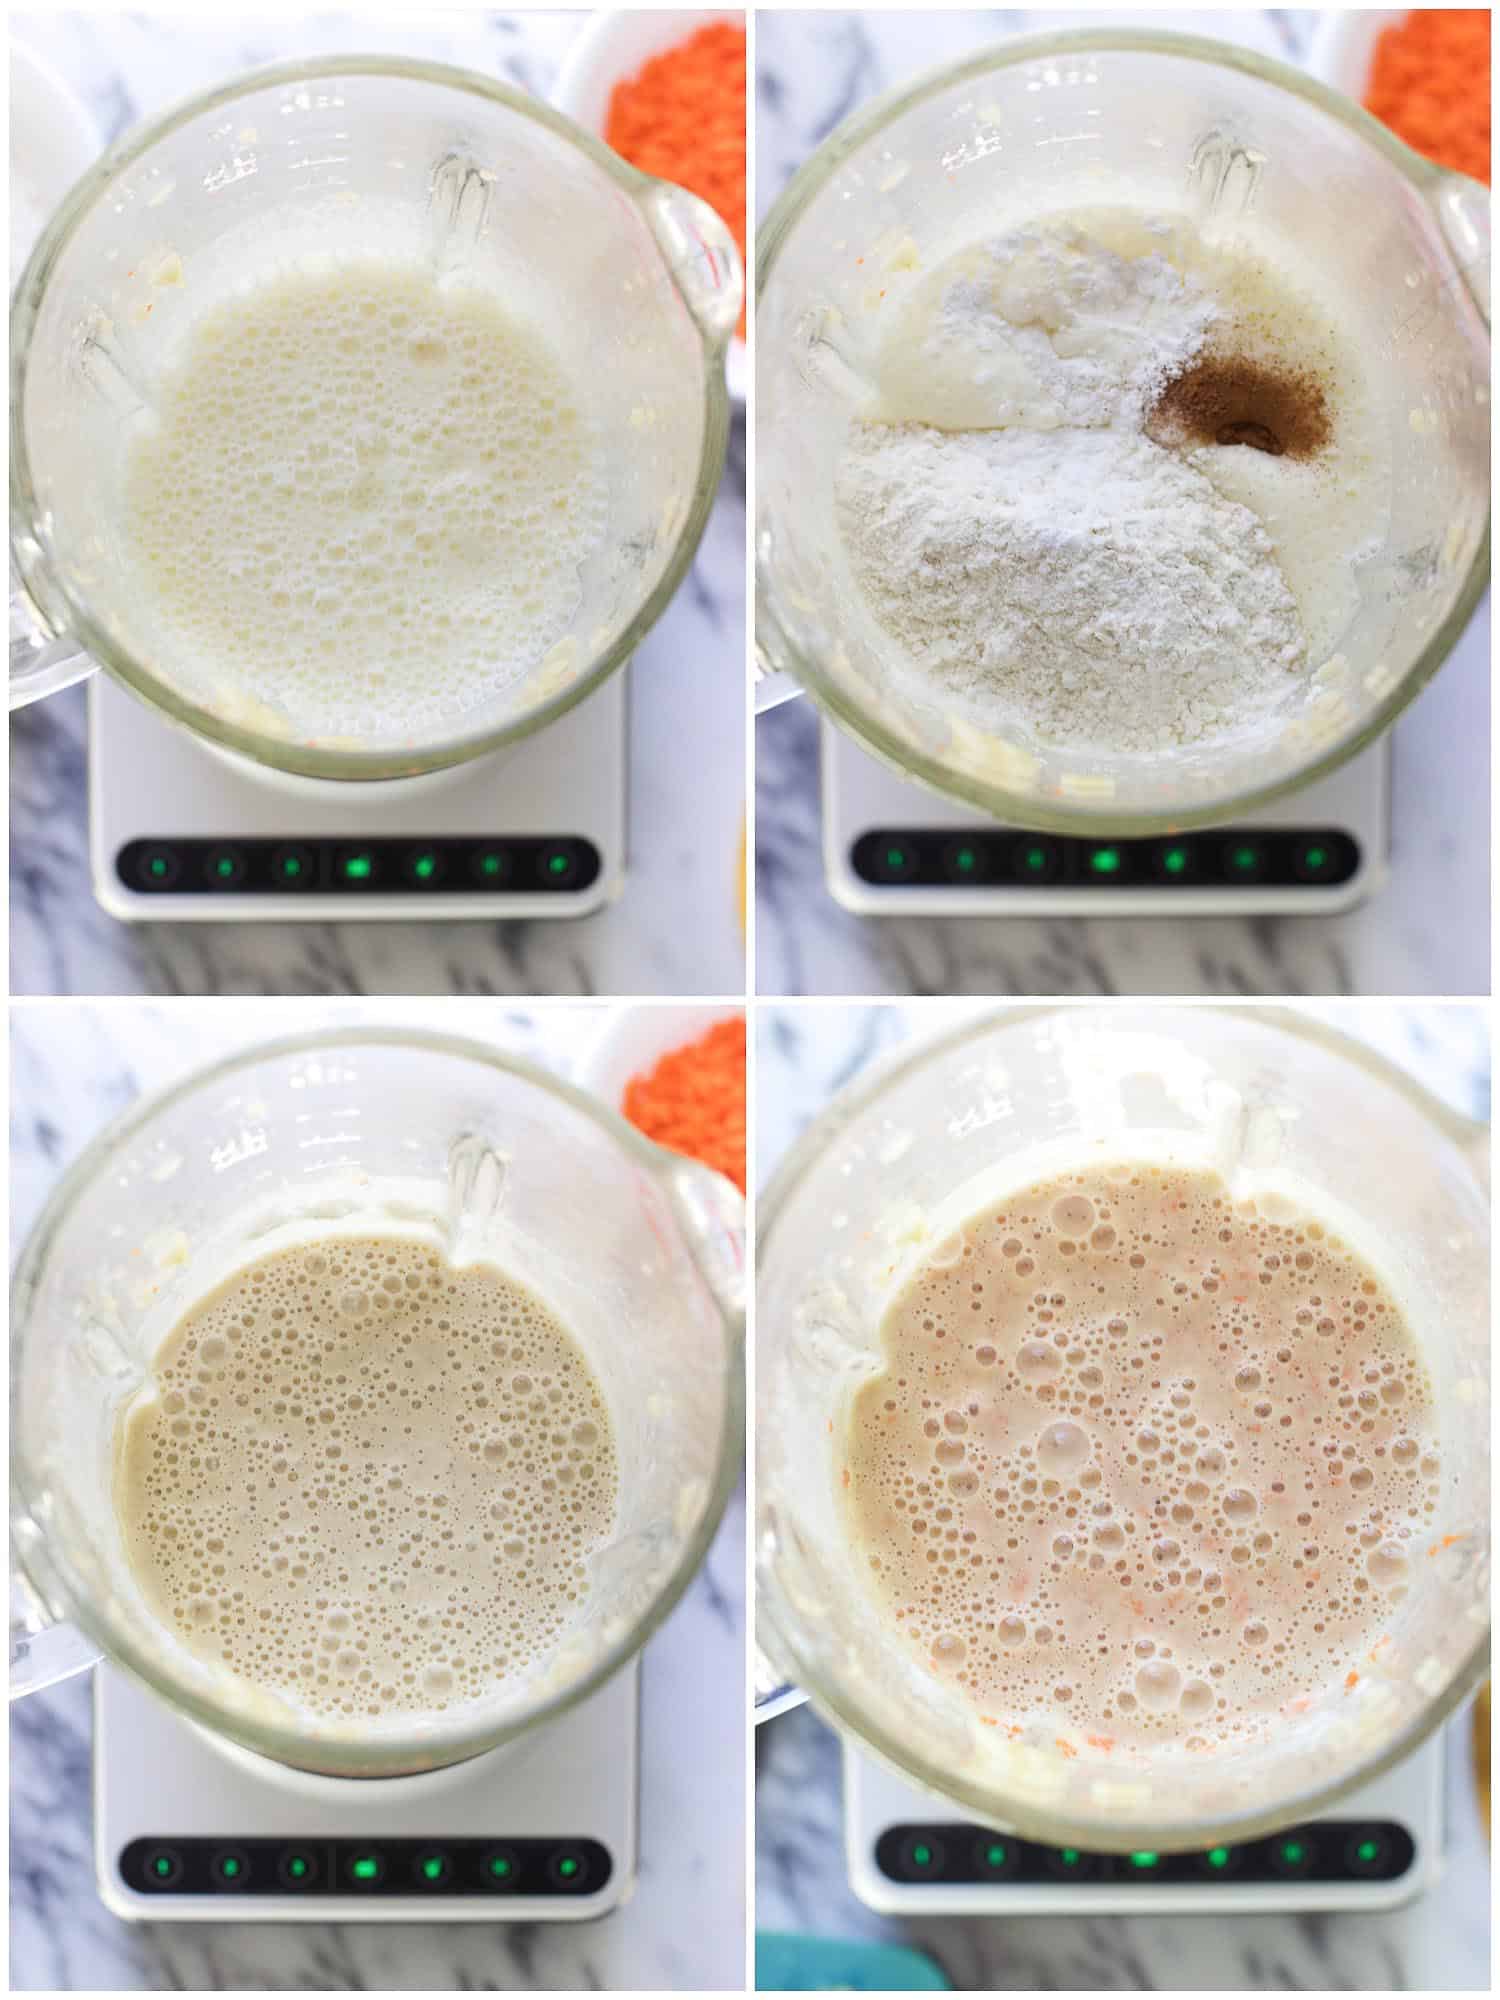 A four-image collage of the pancake batter ingredients being added and mixed into the blender